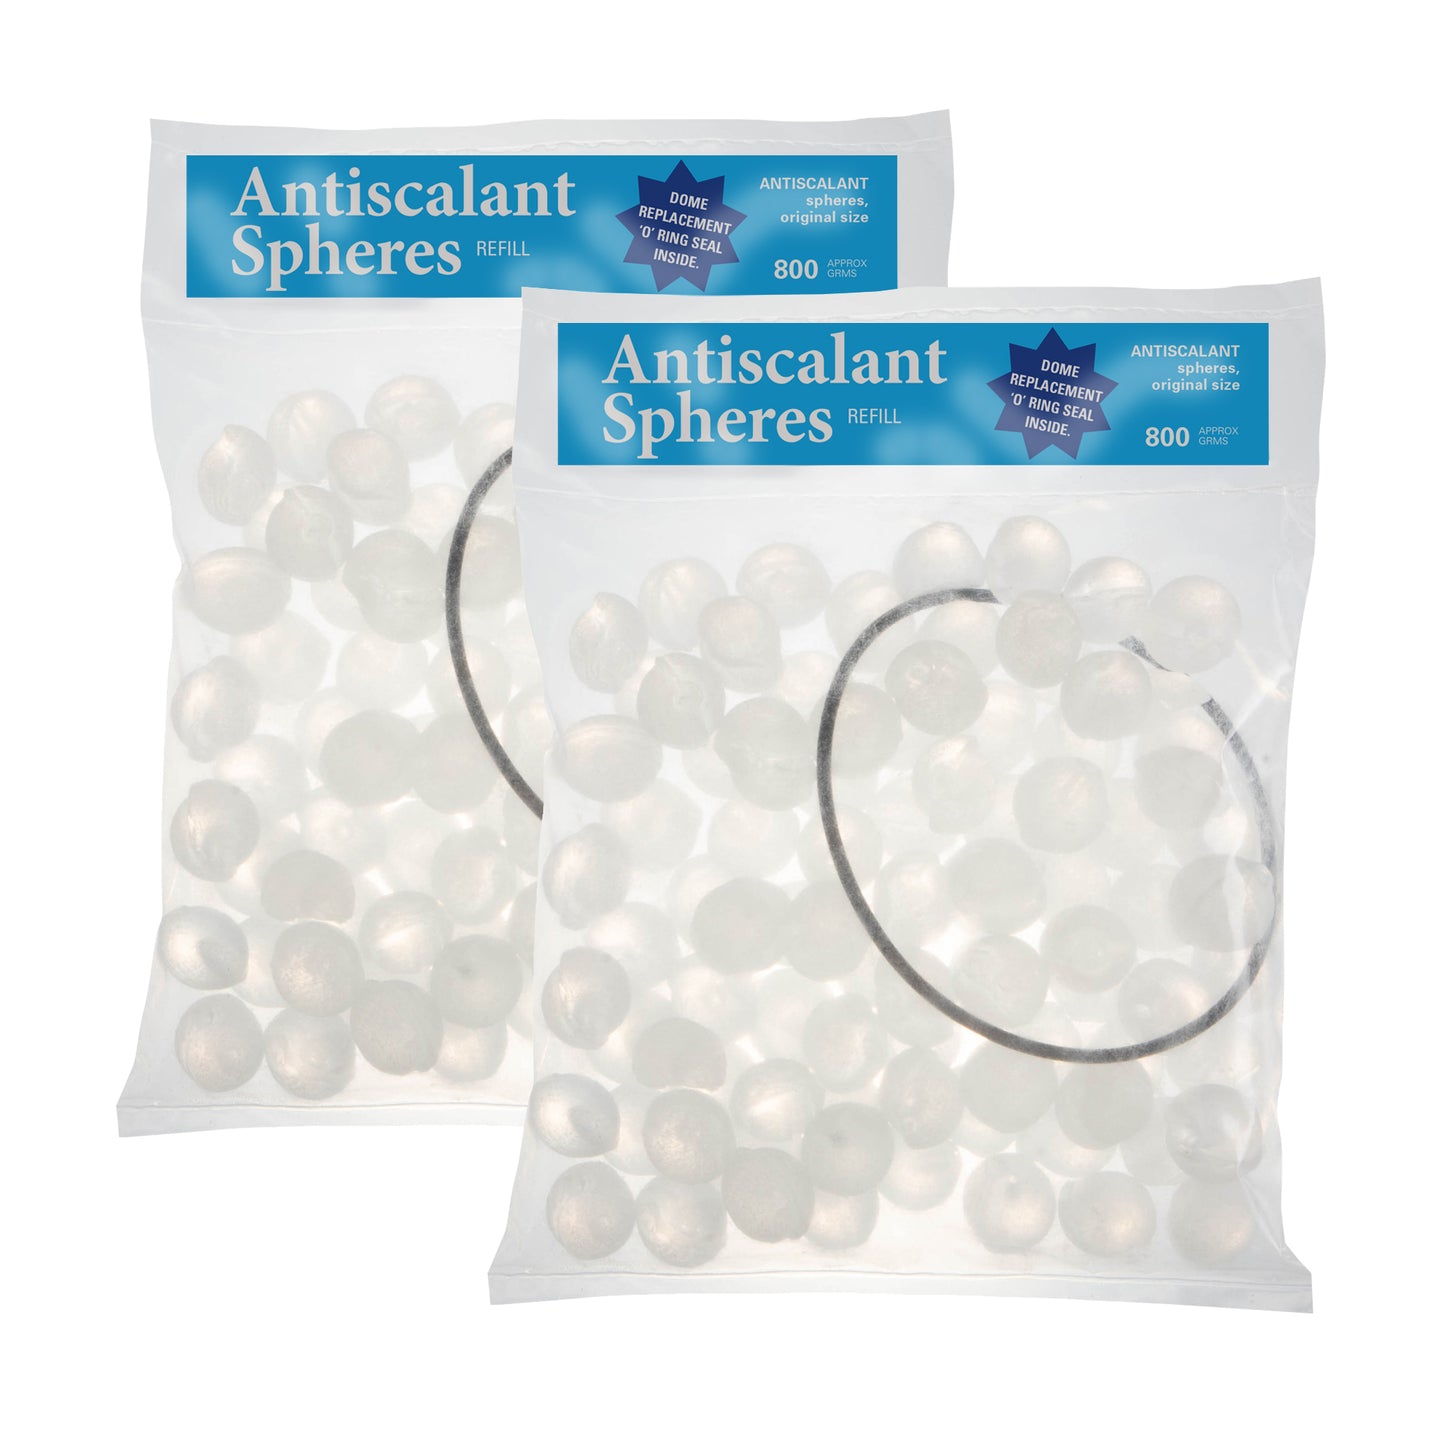 2 x Antiscalant Spheres (Siliphos) Refill Pack 800g